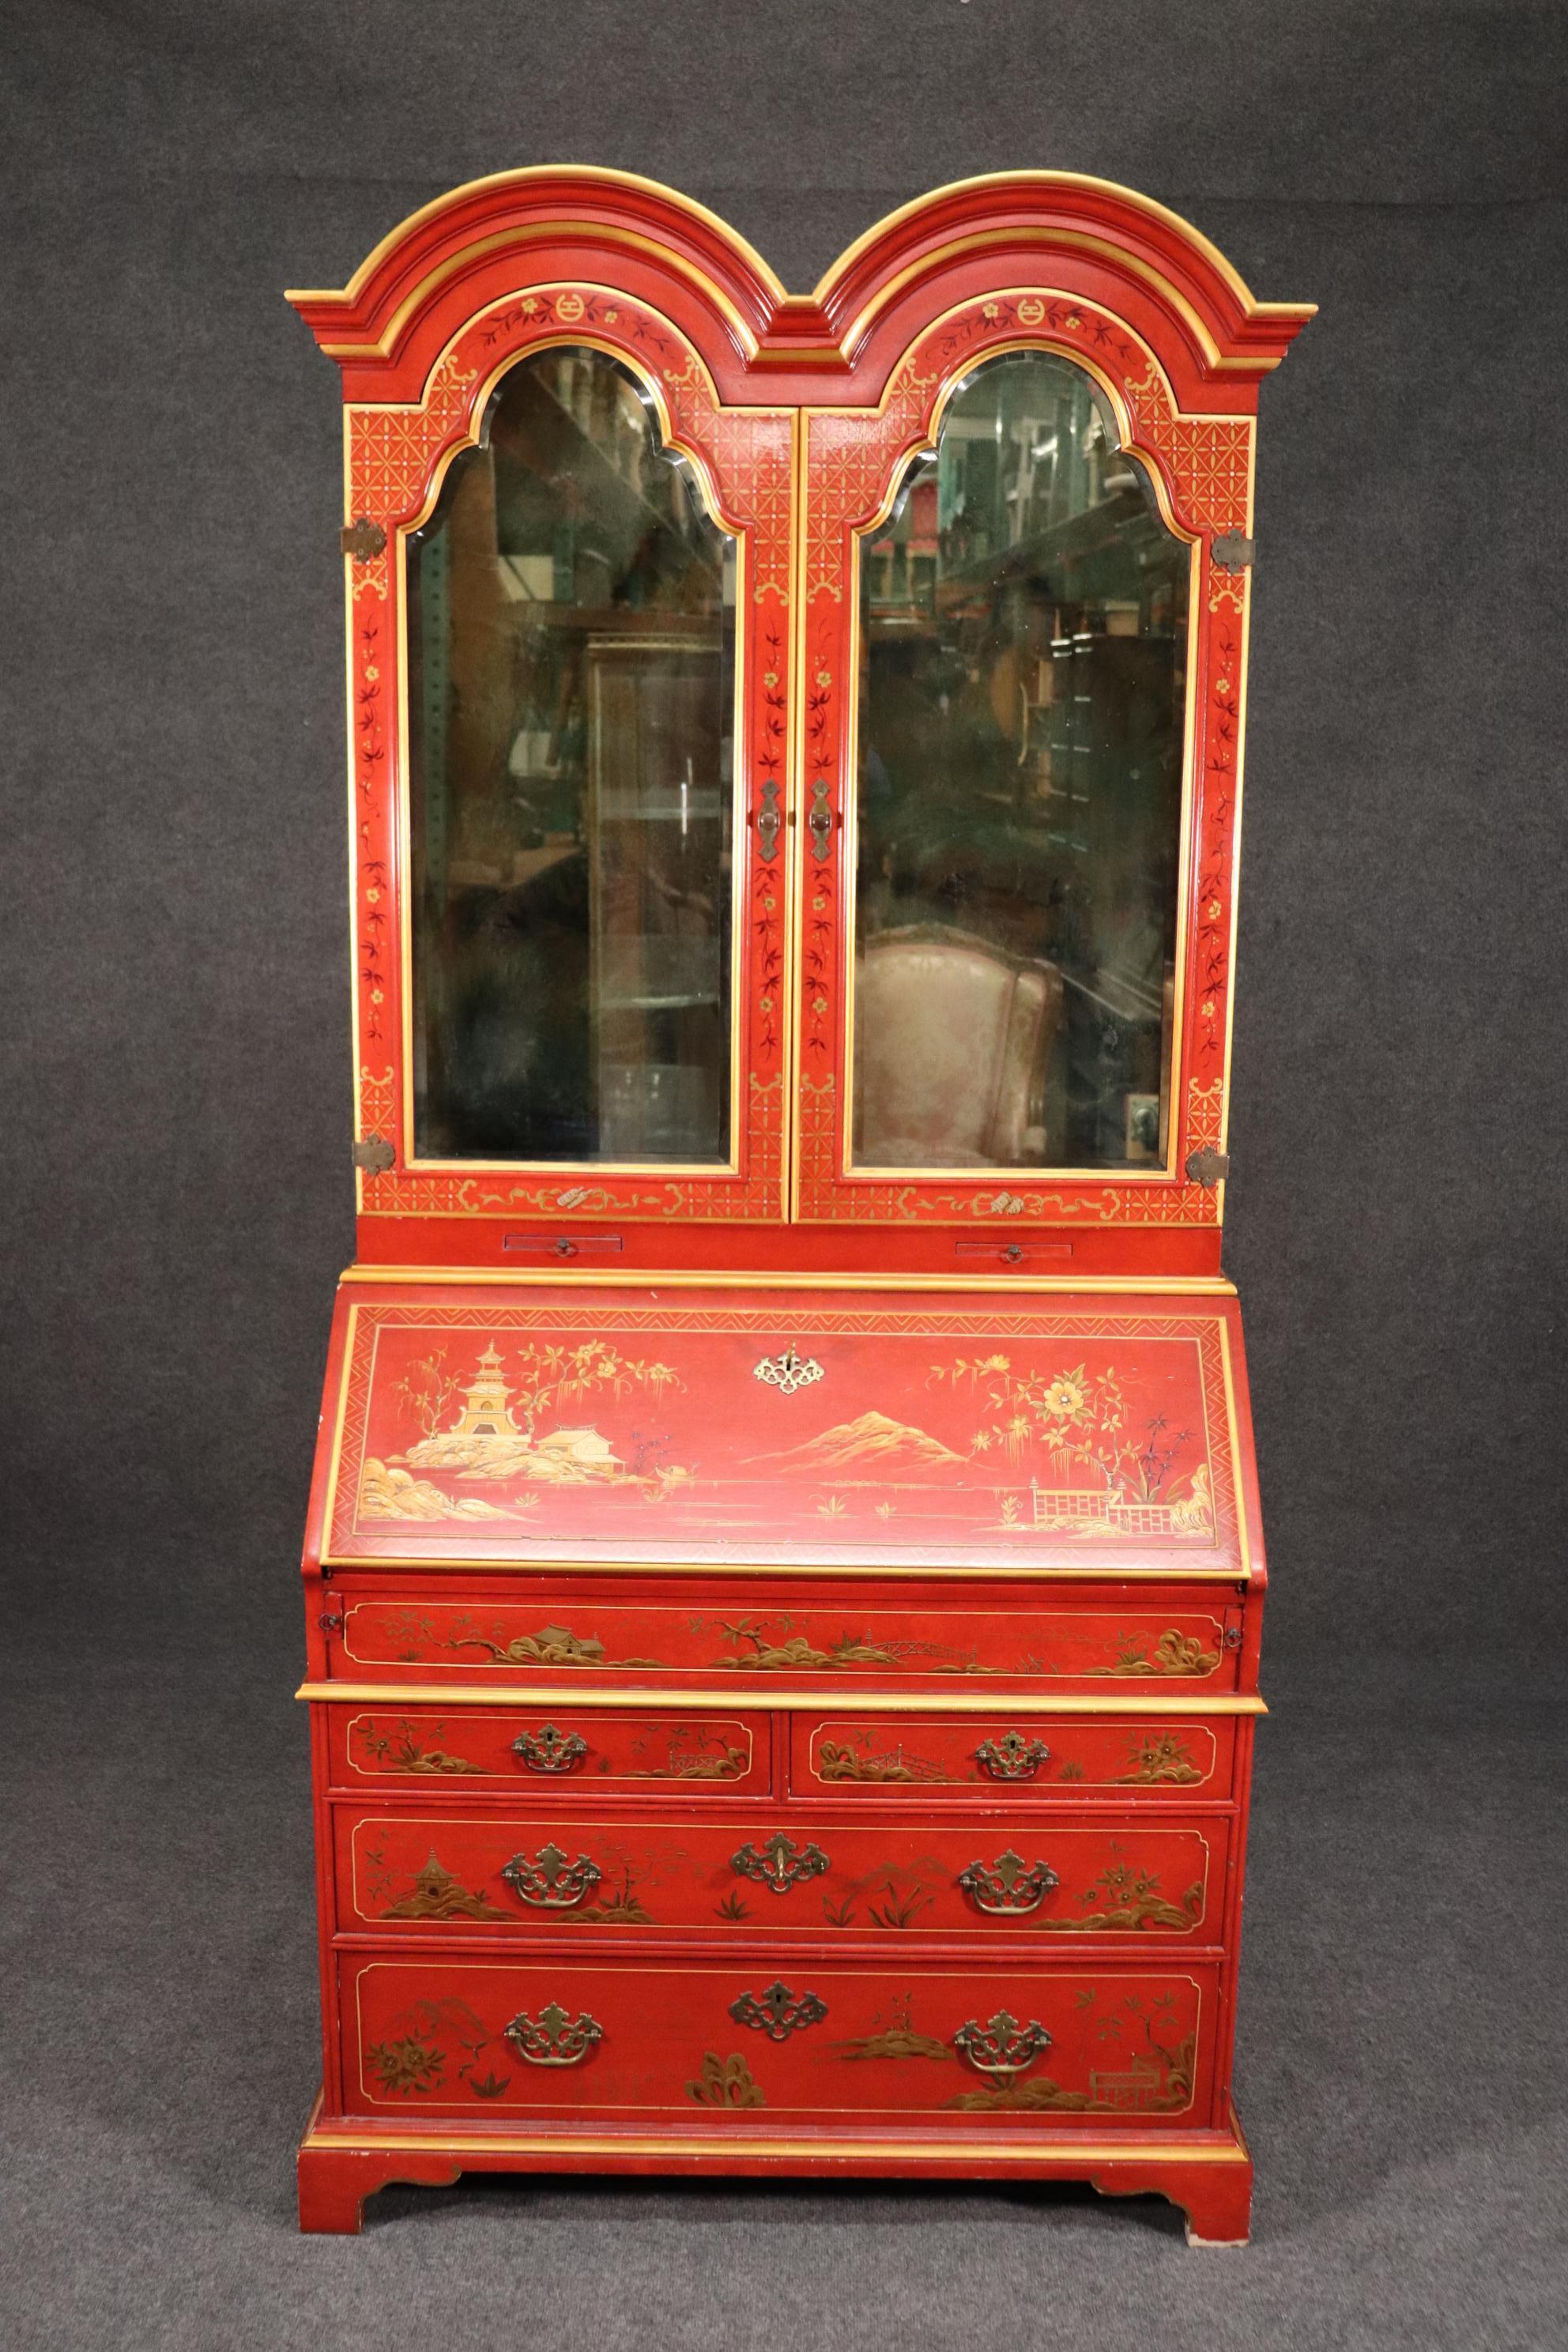 This is a beautiful red chinoiserie paint decorated secretary desk by John Widdicomb. The desk features beveled glass mirrored tombstone doors and a nice rare color. The desk is in good vintage condition and will show signs of use and some minor